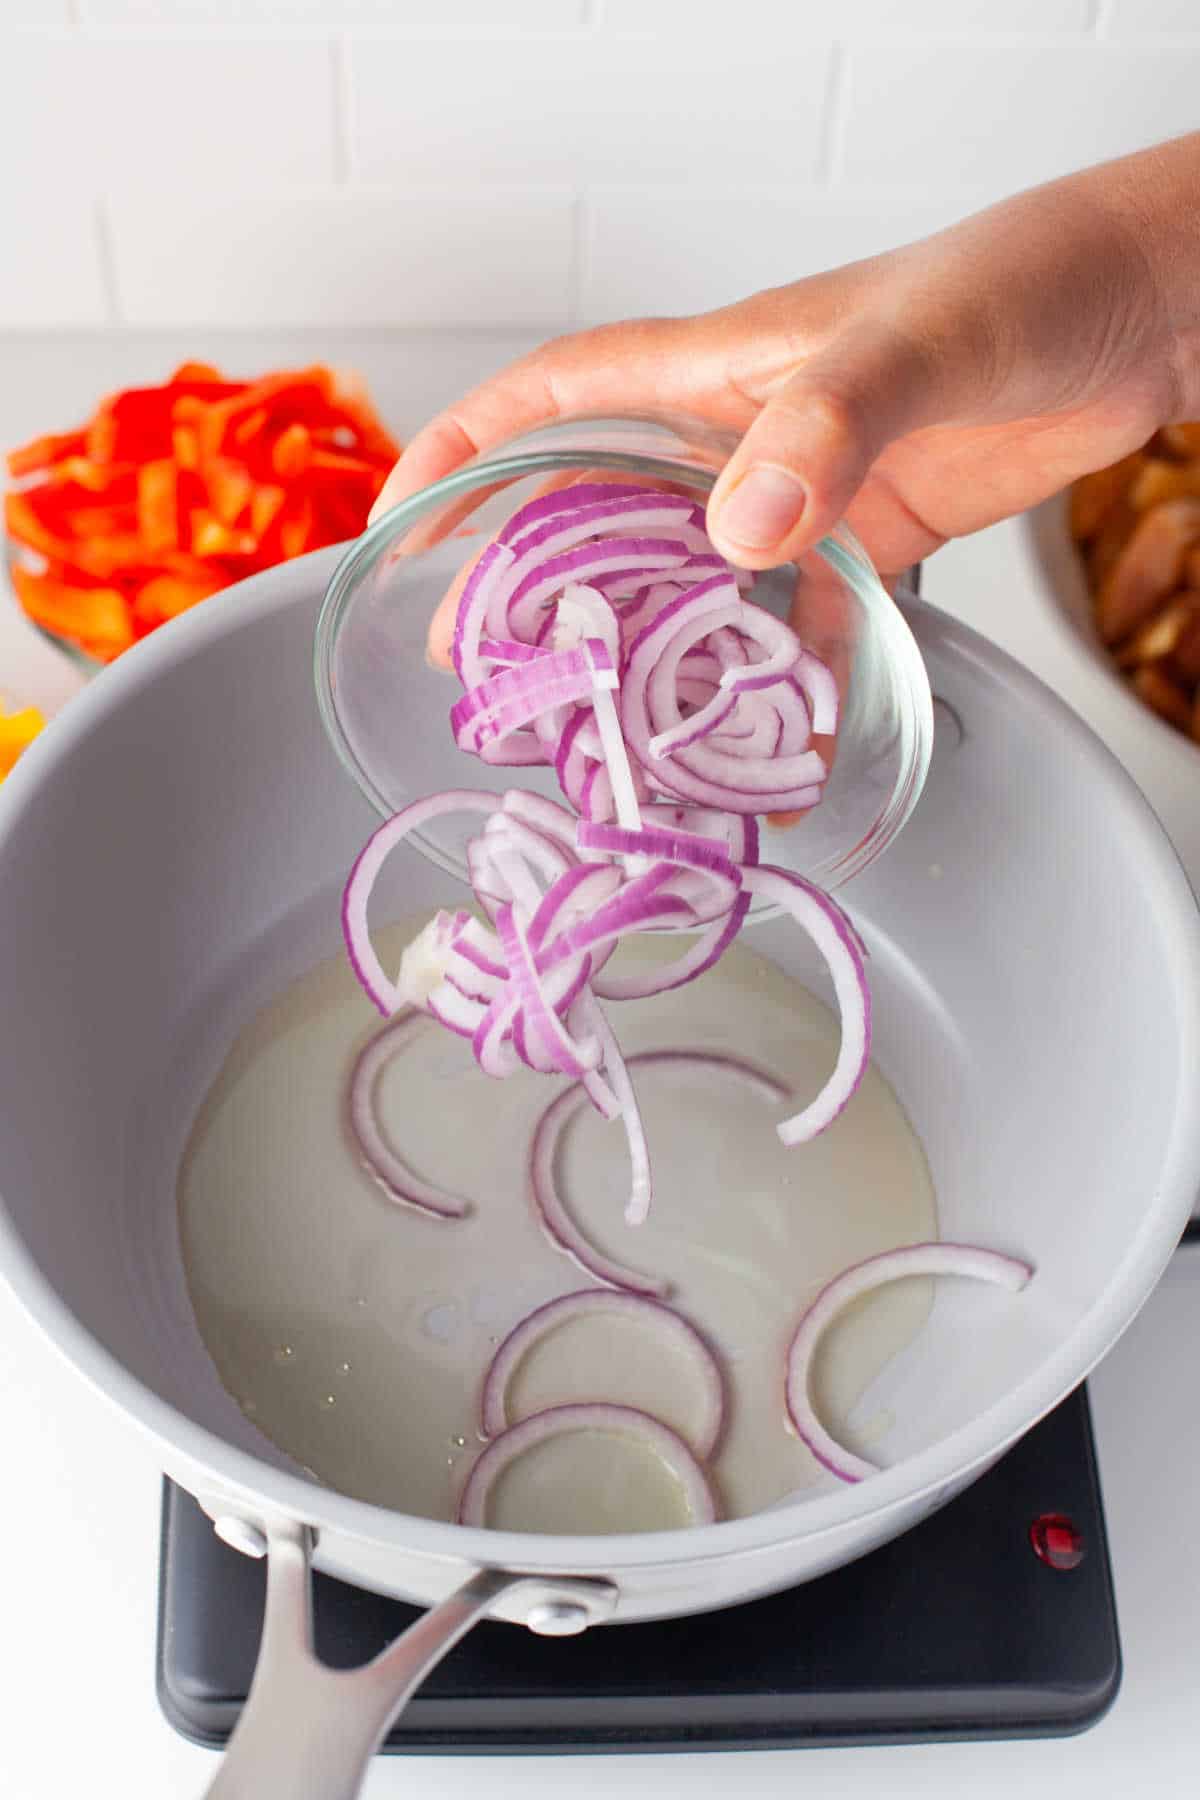 Half moon slices of red onion falling into a pan with hot oil.